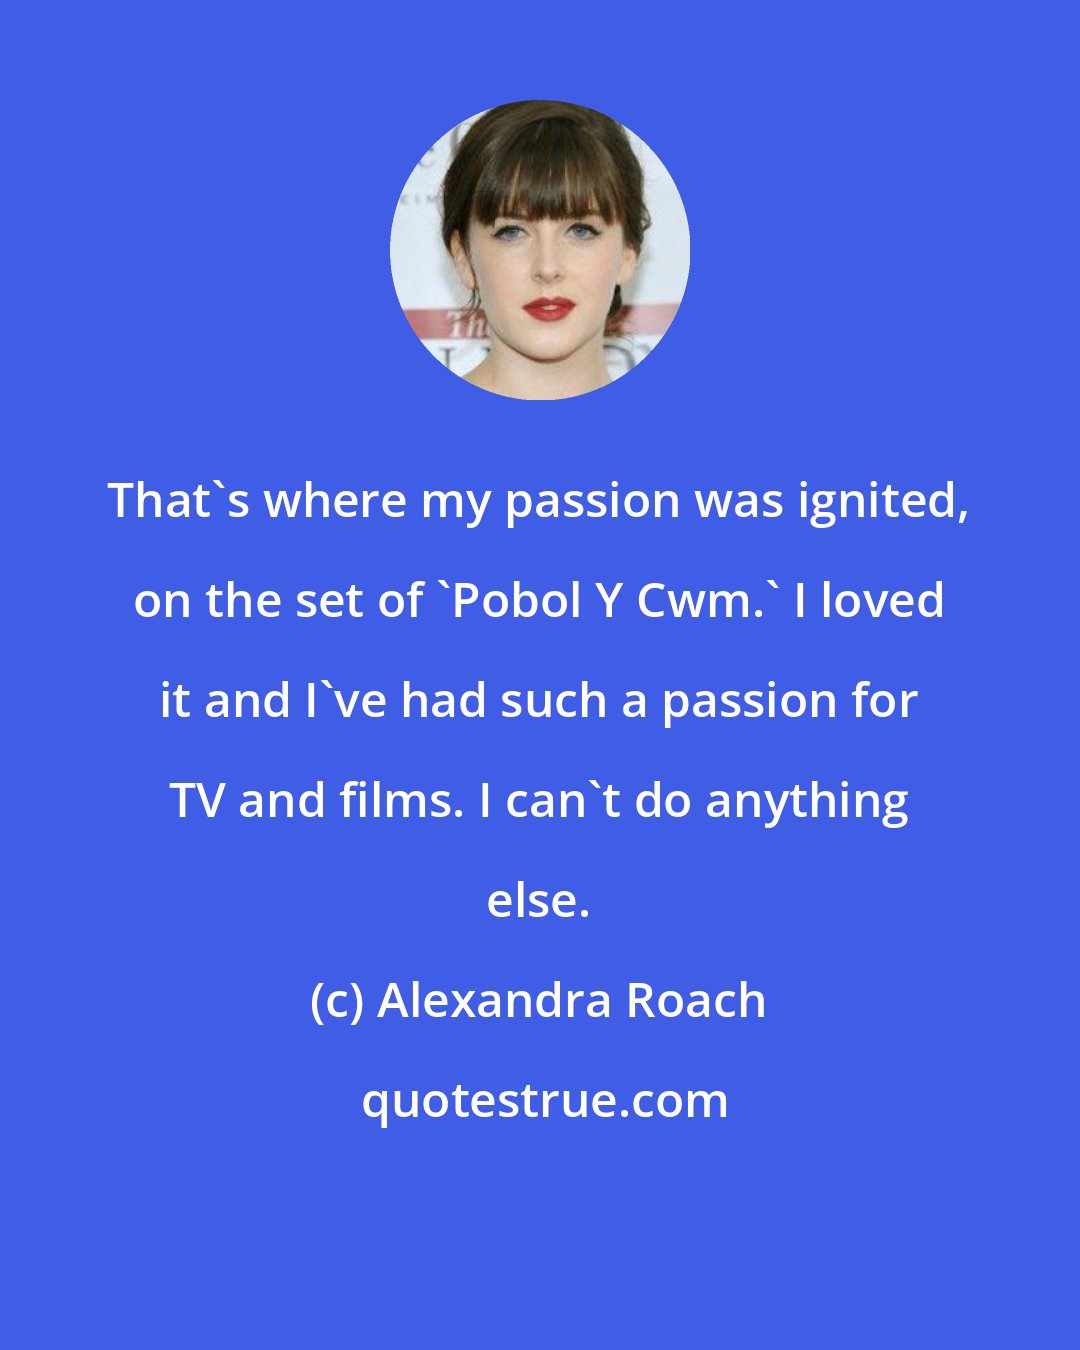 Alexandra Roach: That's where my passion was ignited, on the set of 'Pobol Y Cwm.' I loved it and I've had such a passion for TV and films. I can't do anything else.